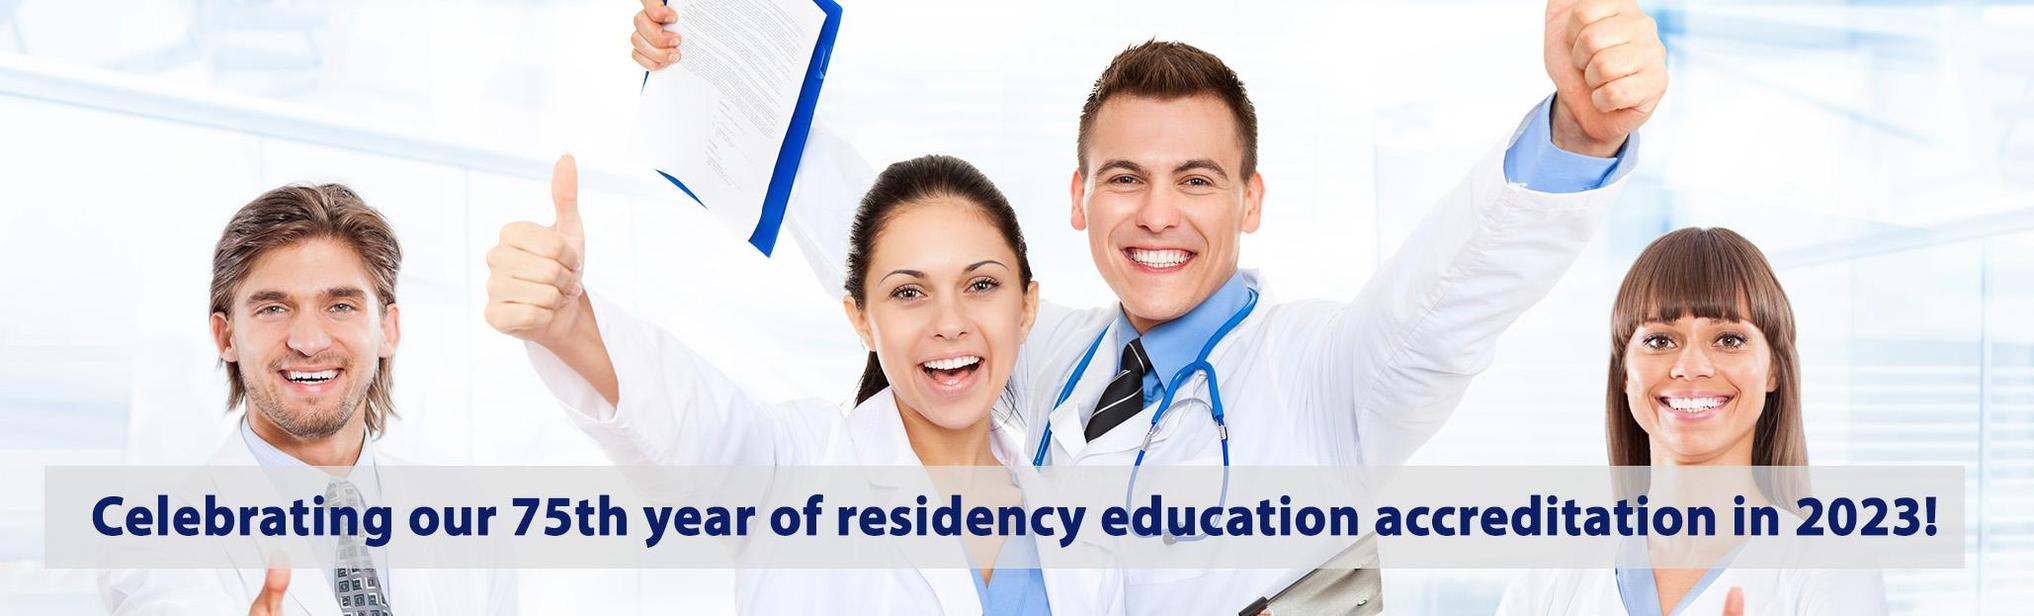 Celebrating our 75th year of resident education accreditation in 2023